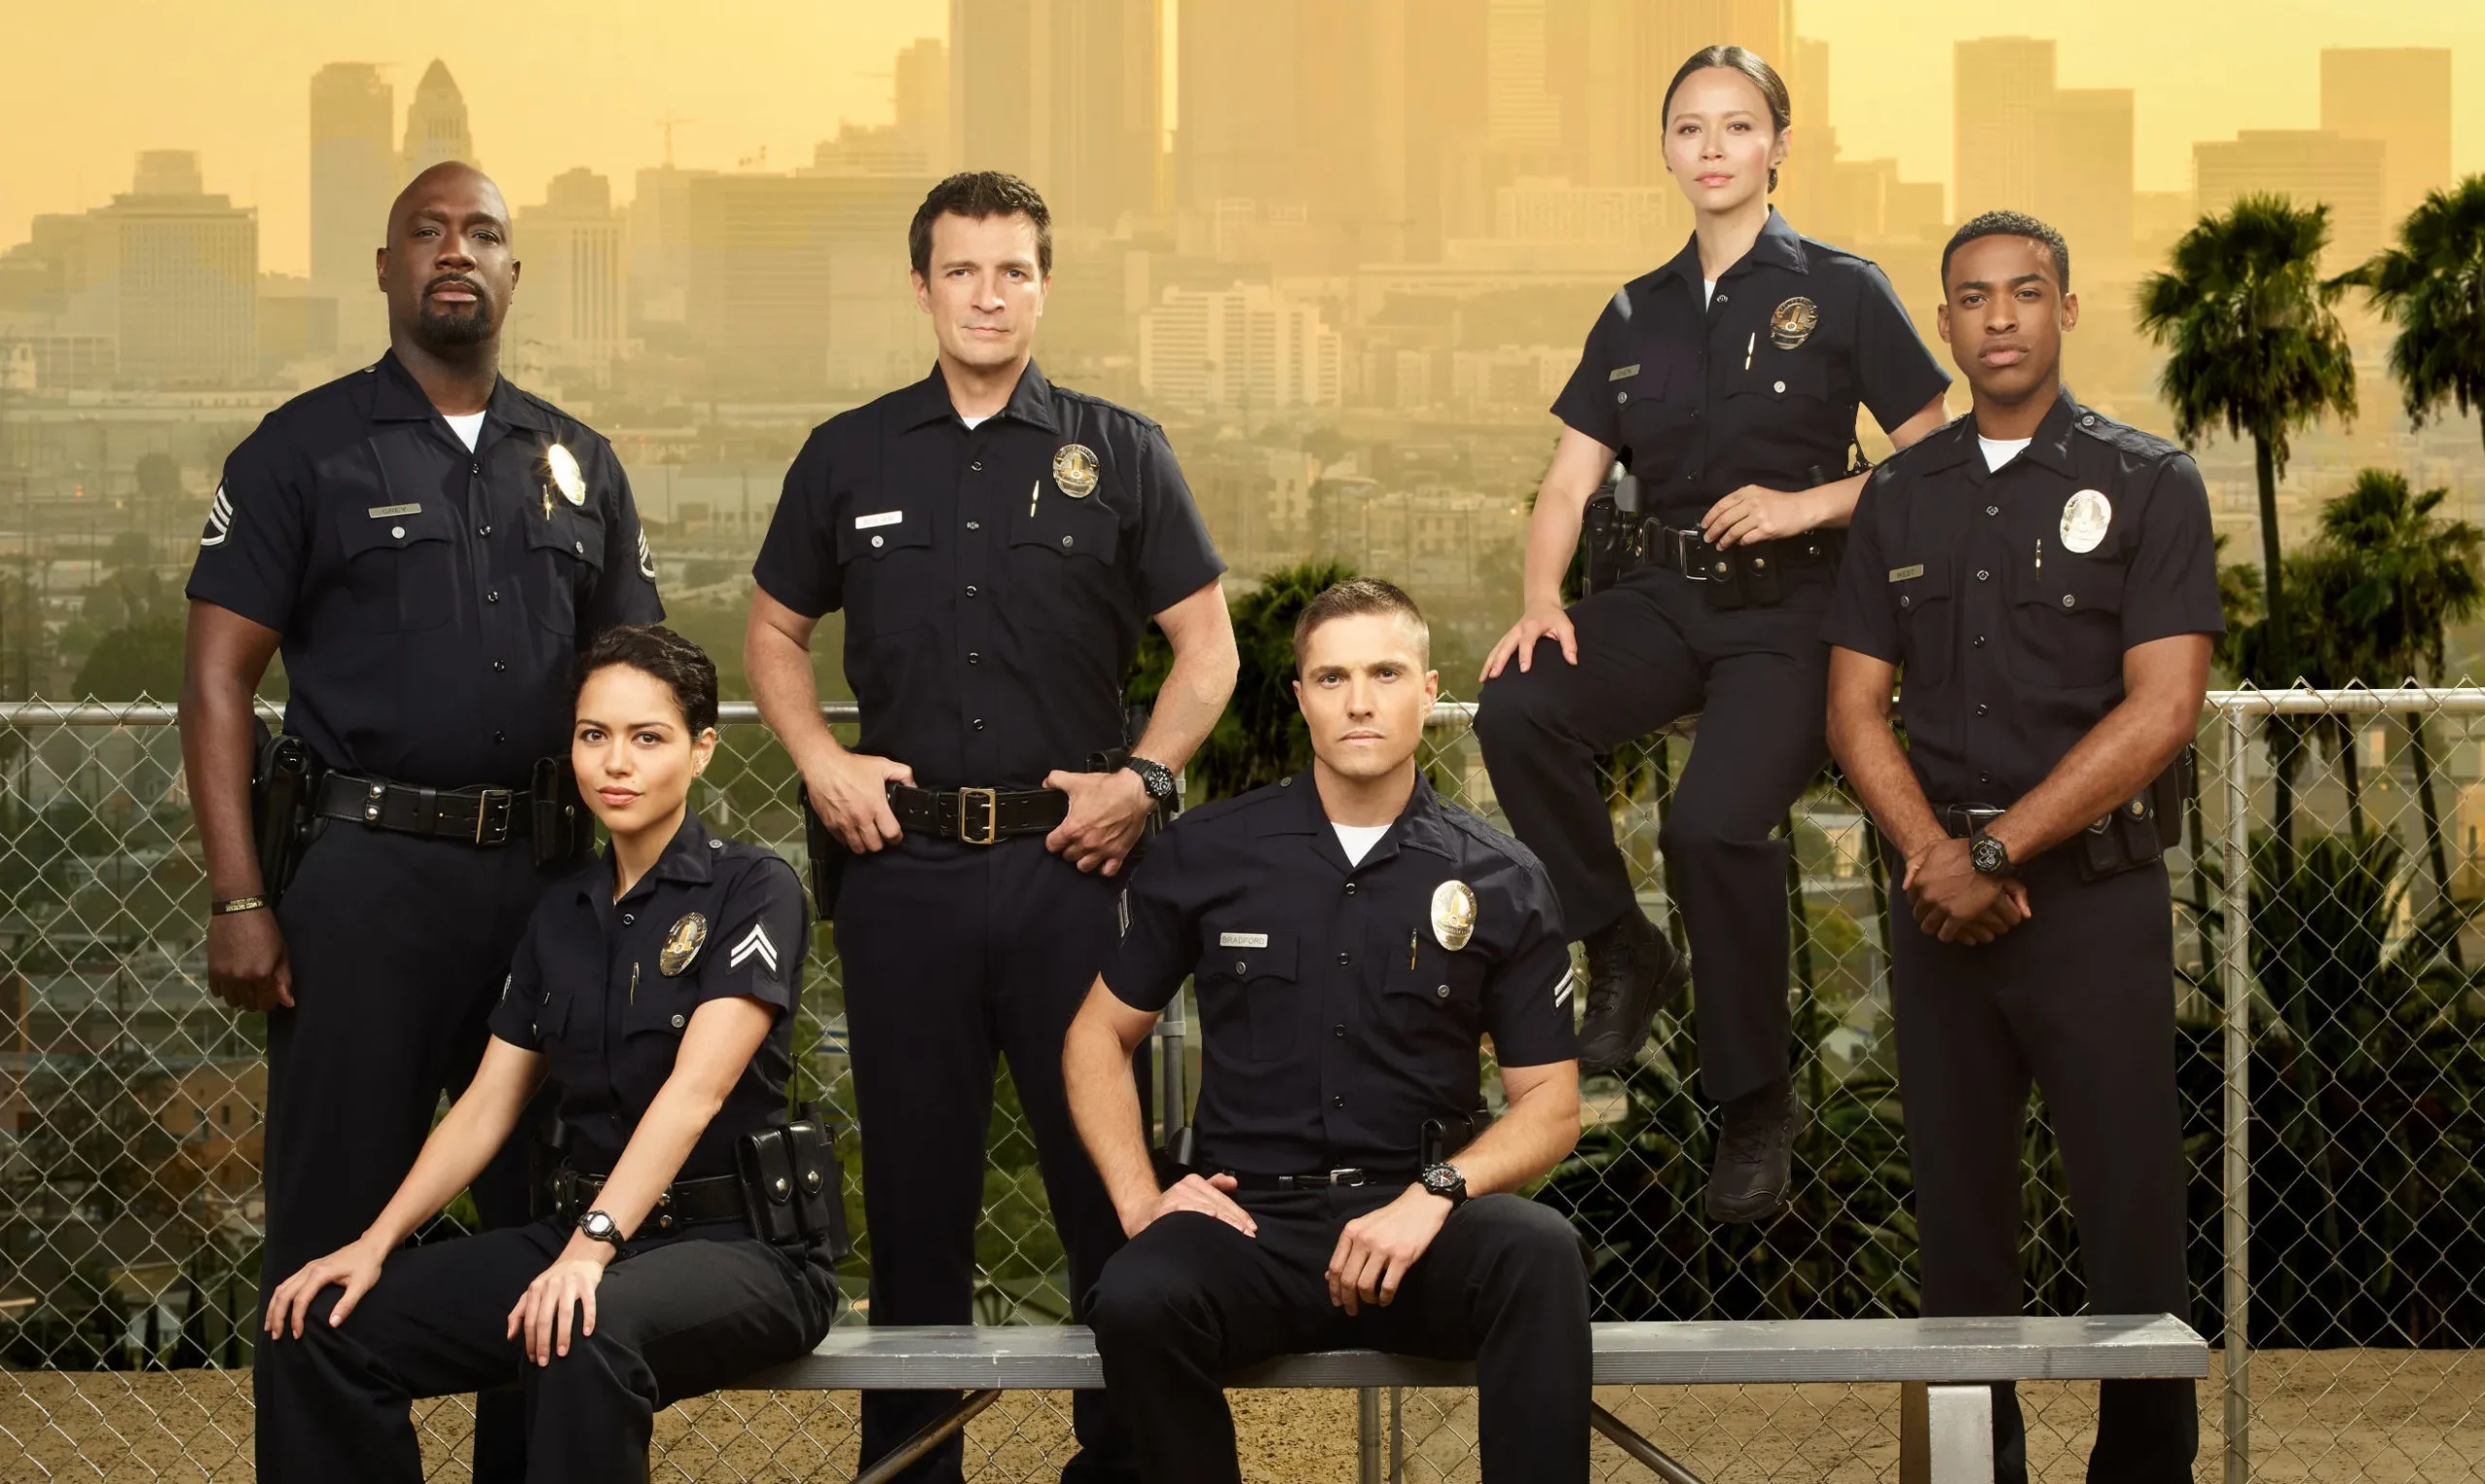 The Rookie Season 6: Premise, Cast, Release Date, and All You Need to Know